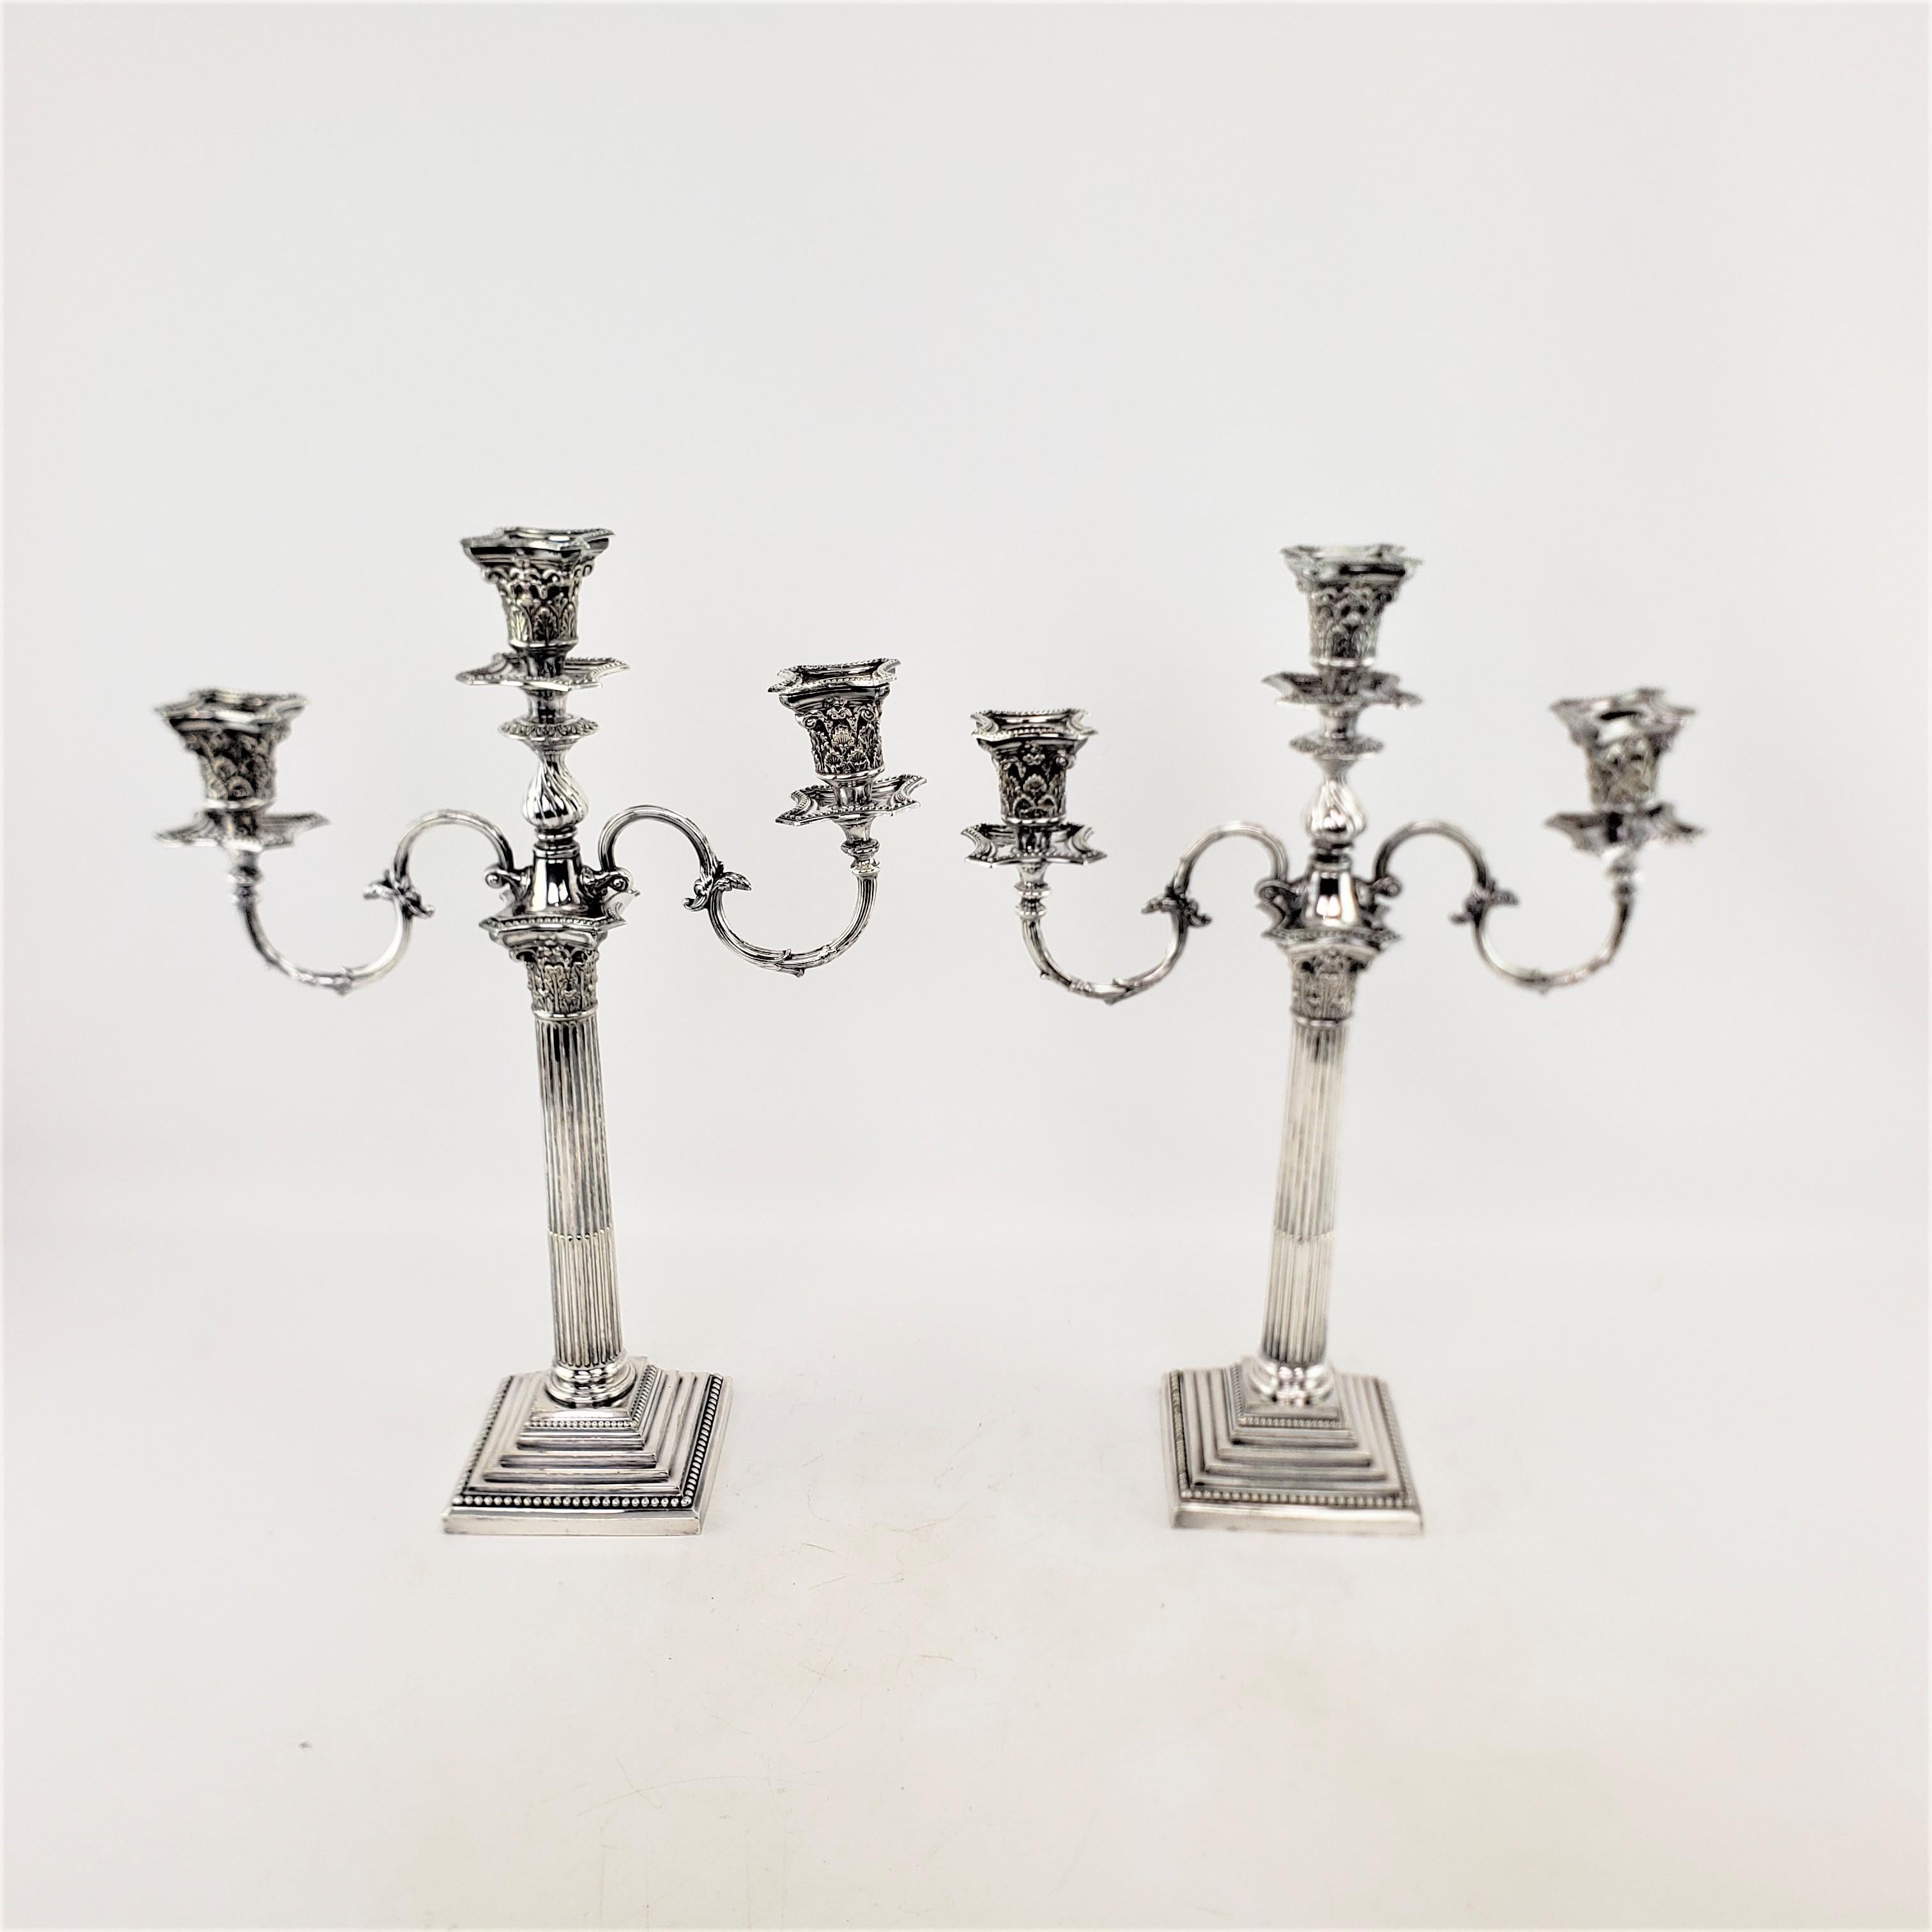 Pair of Antique Mappin & Webb Convertible Candelabras in Corinthian Column Style In Good Condition For Sale In Hamilton, Ontario